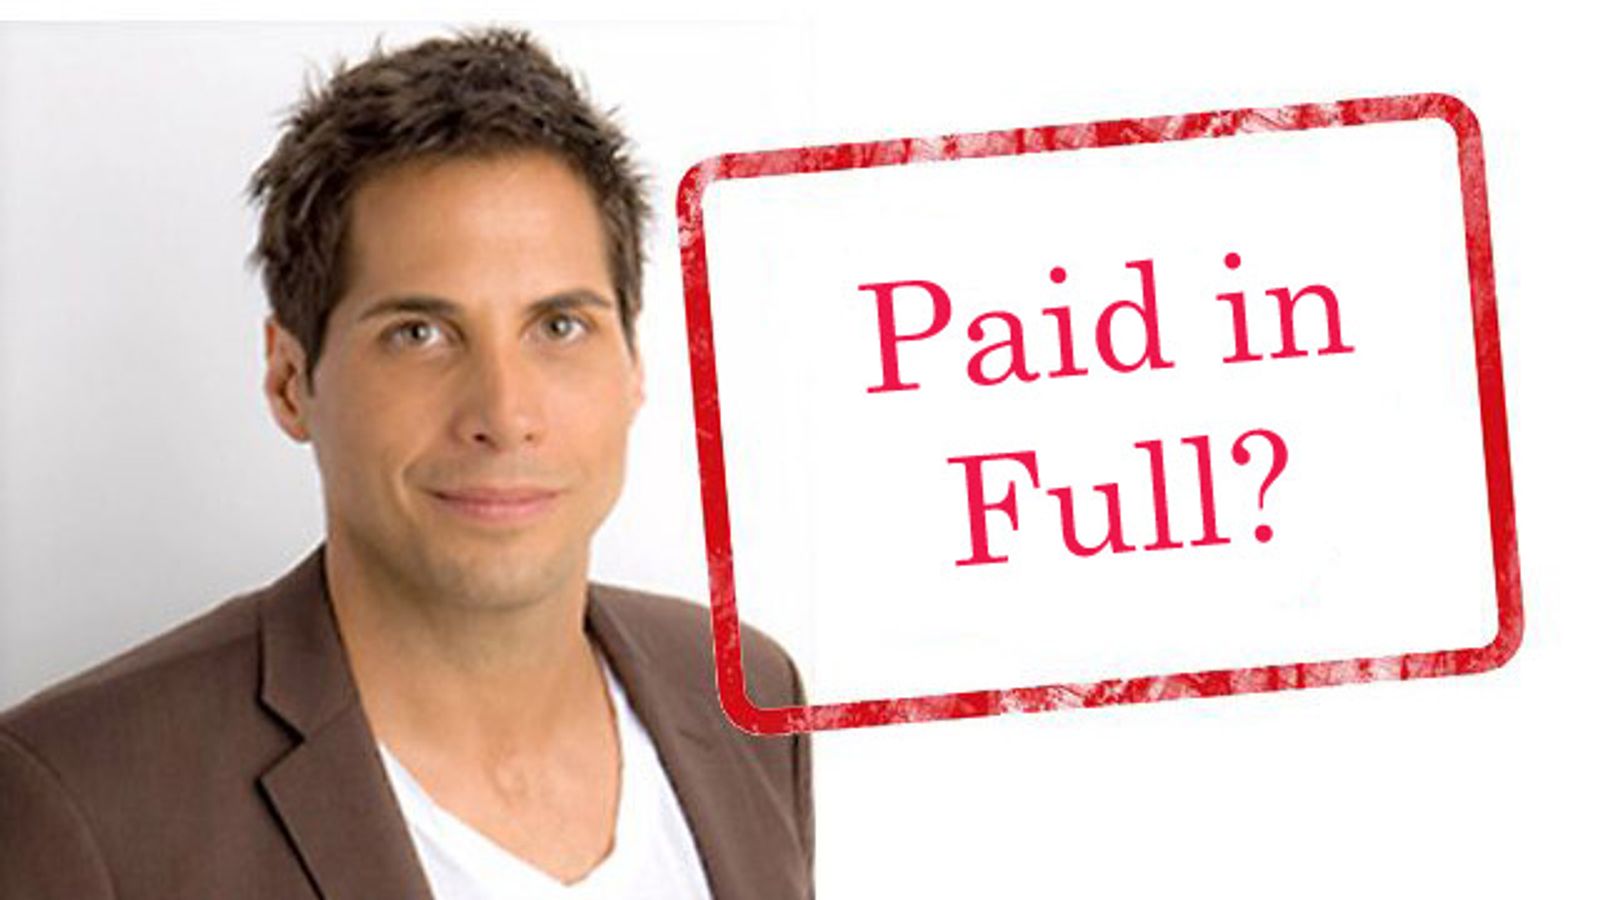 Joe Francis Thinks He No Longer Owes $33M in Back Taxes